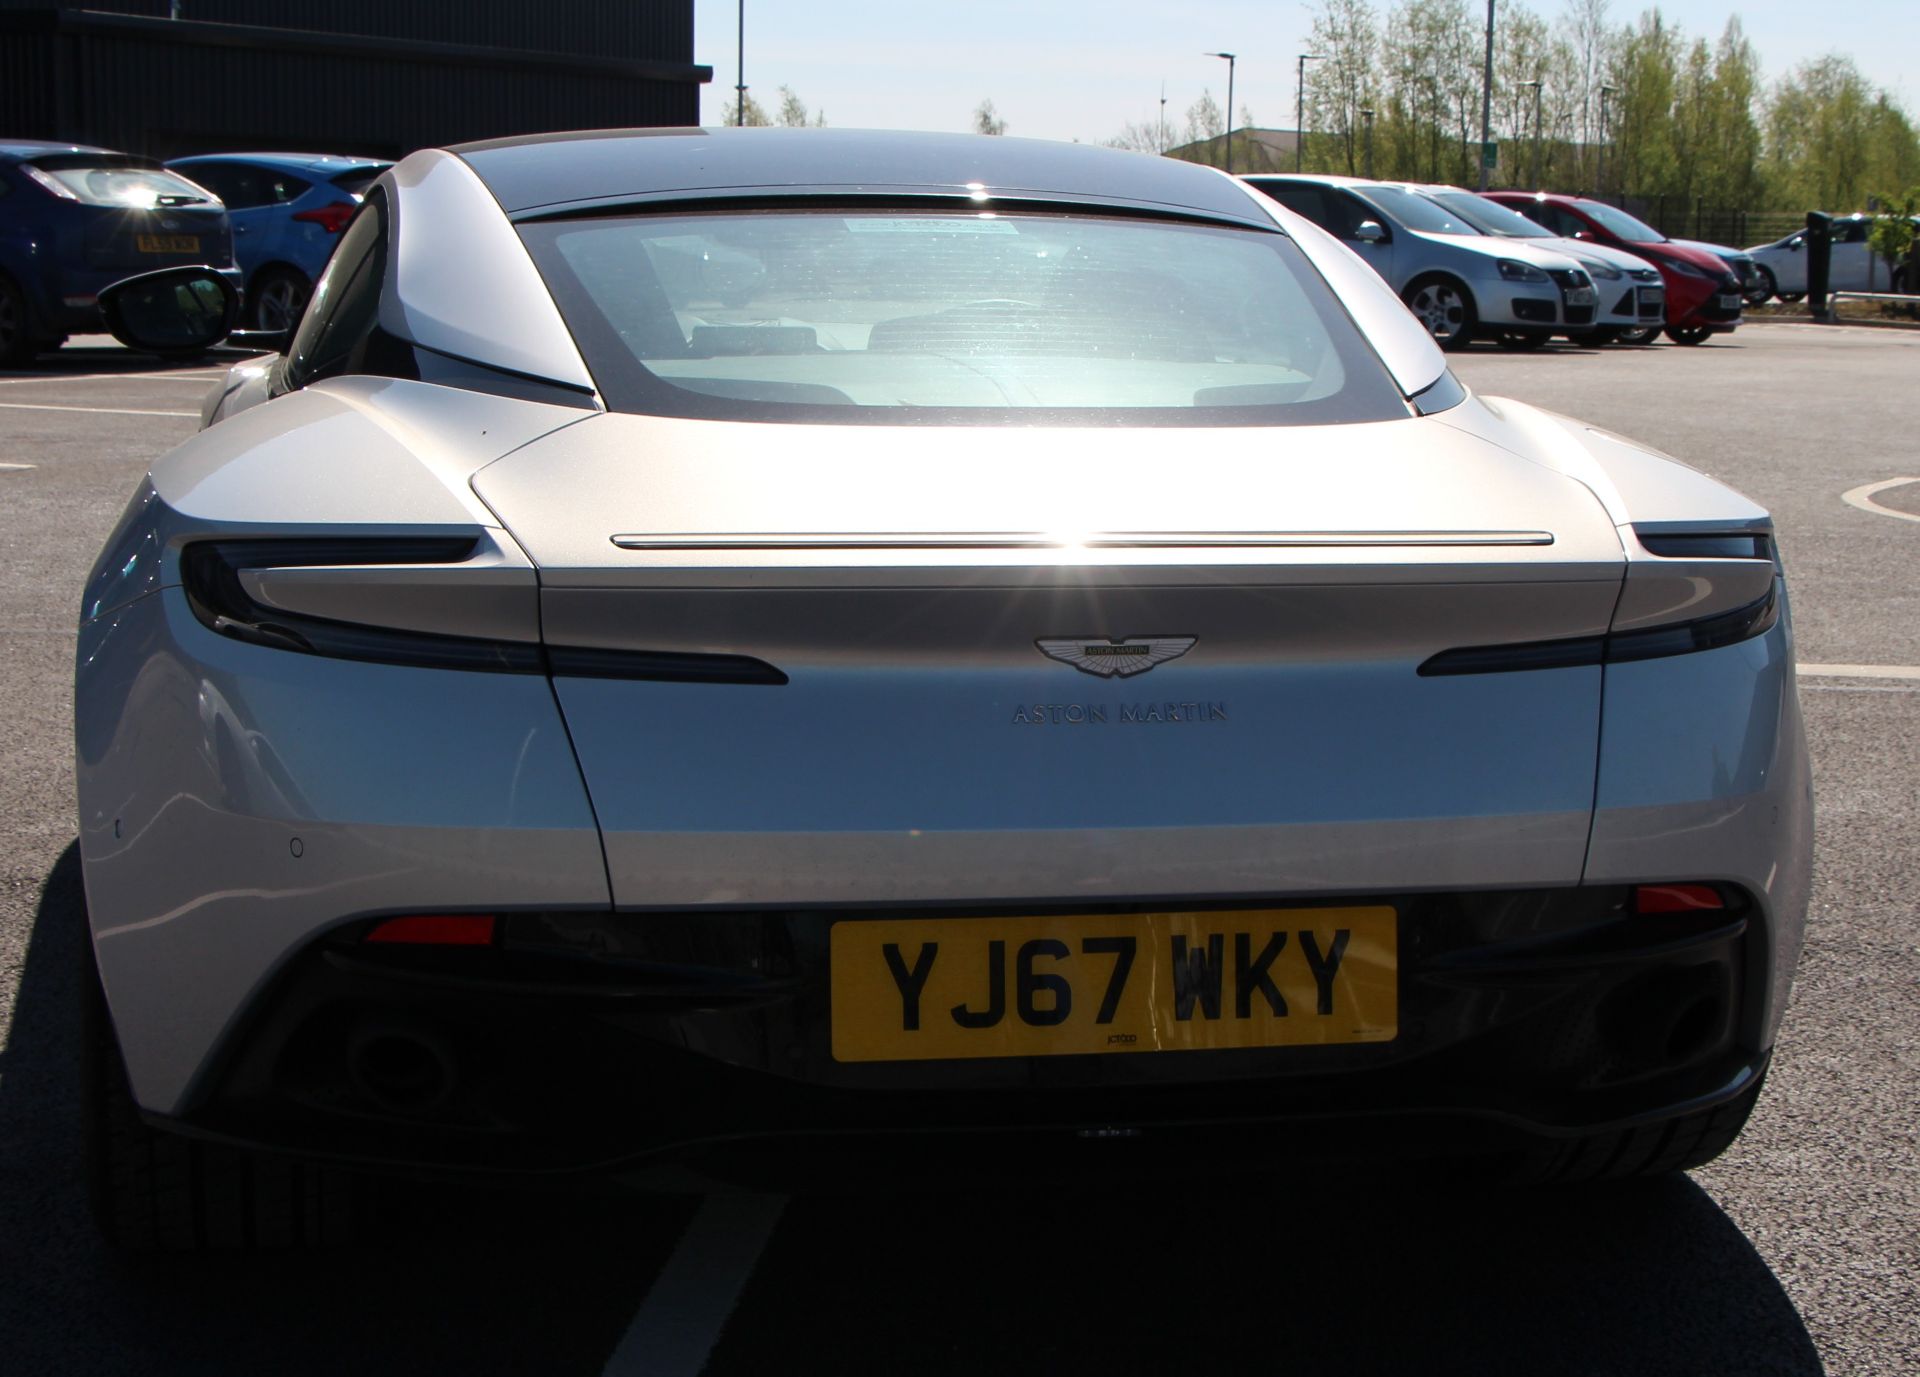 ASTON MARTIN DB11 V8 AUTOMATIC (3982cc) COUPE - 8 speed automatic - petrol - silver - dark - Image 33 of 68